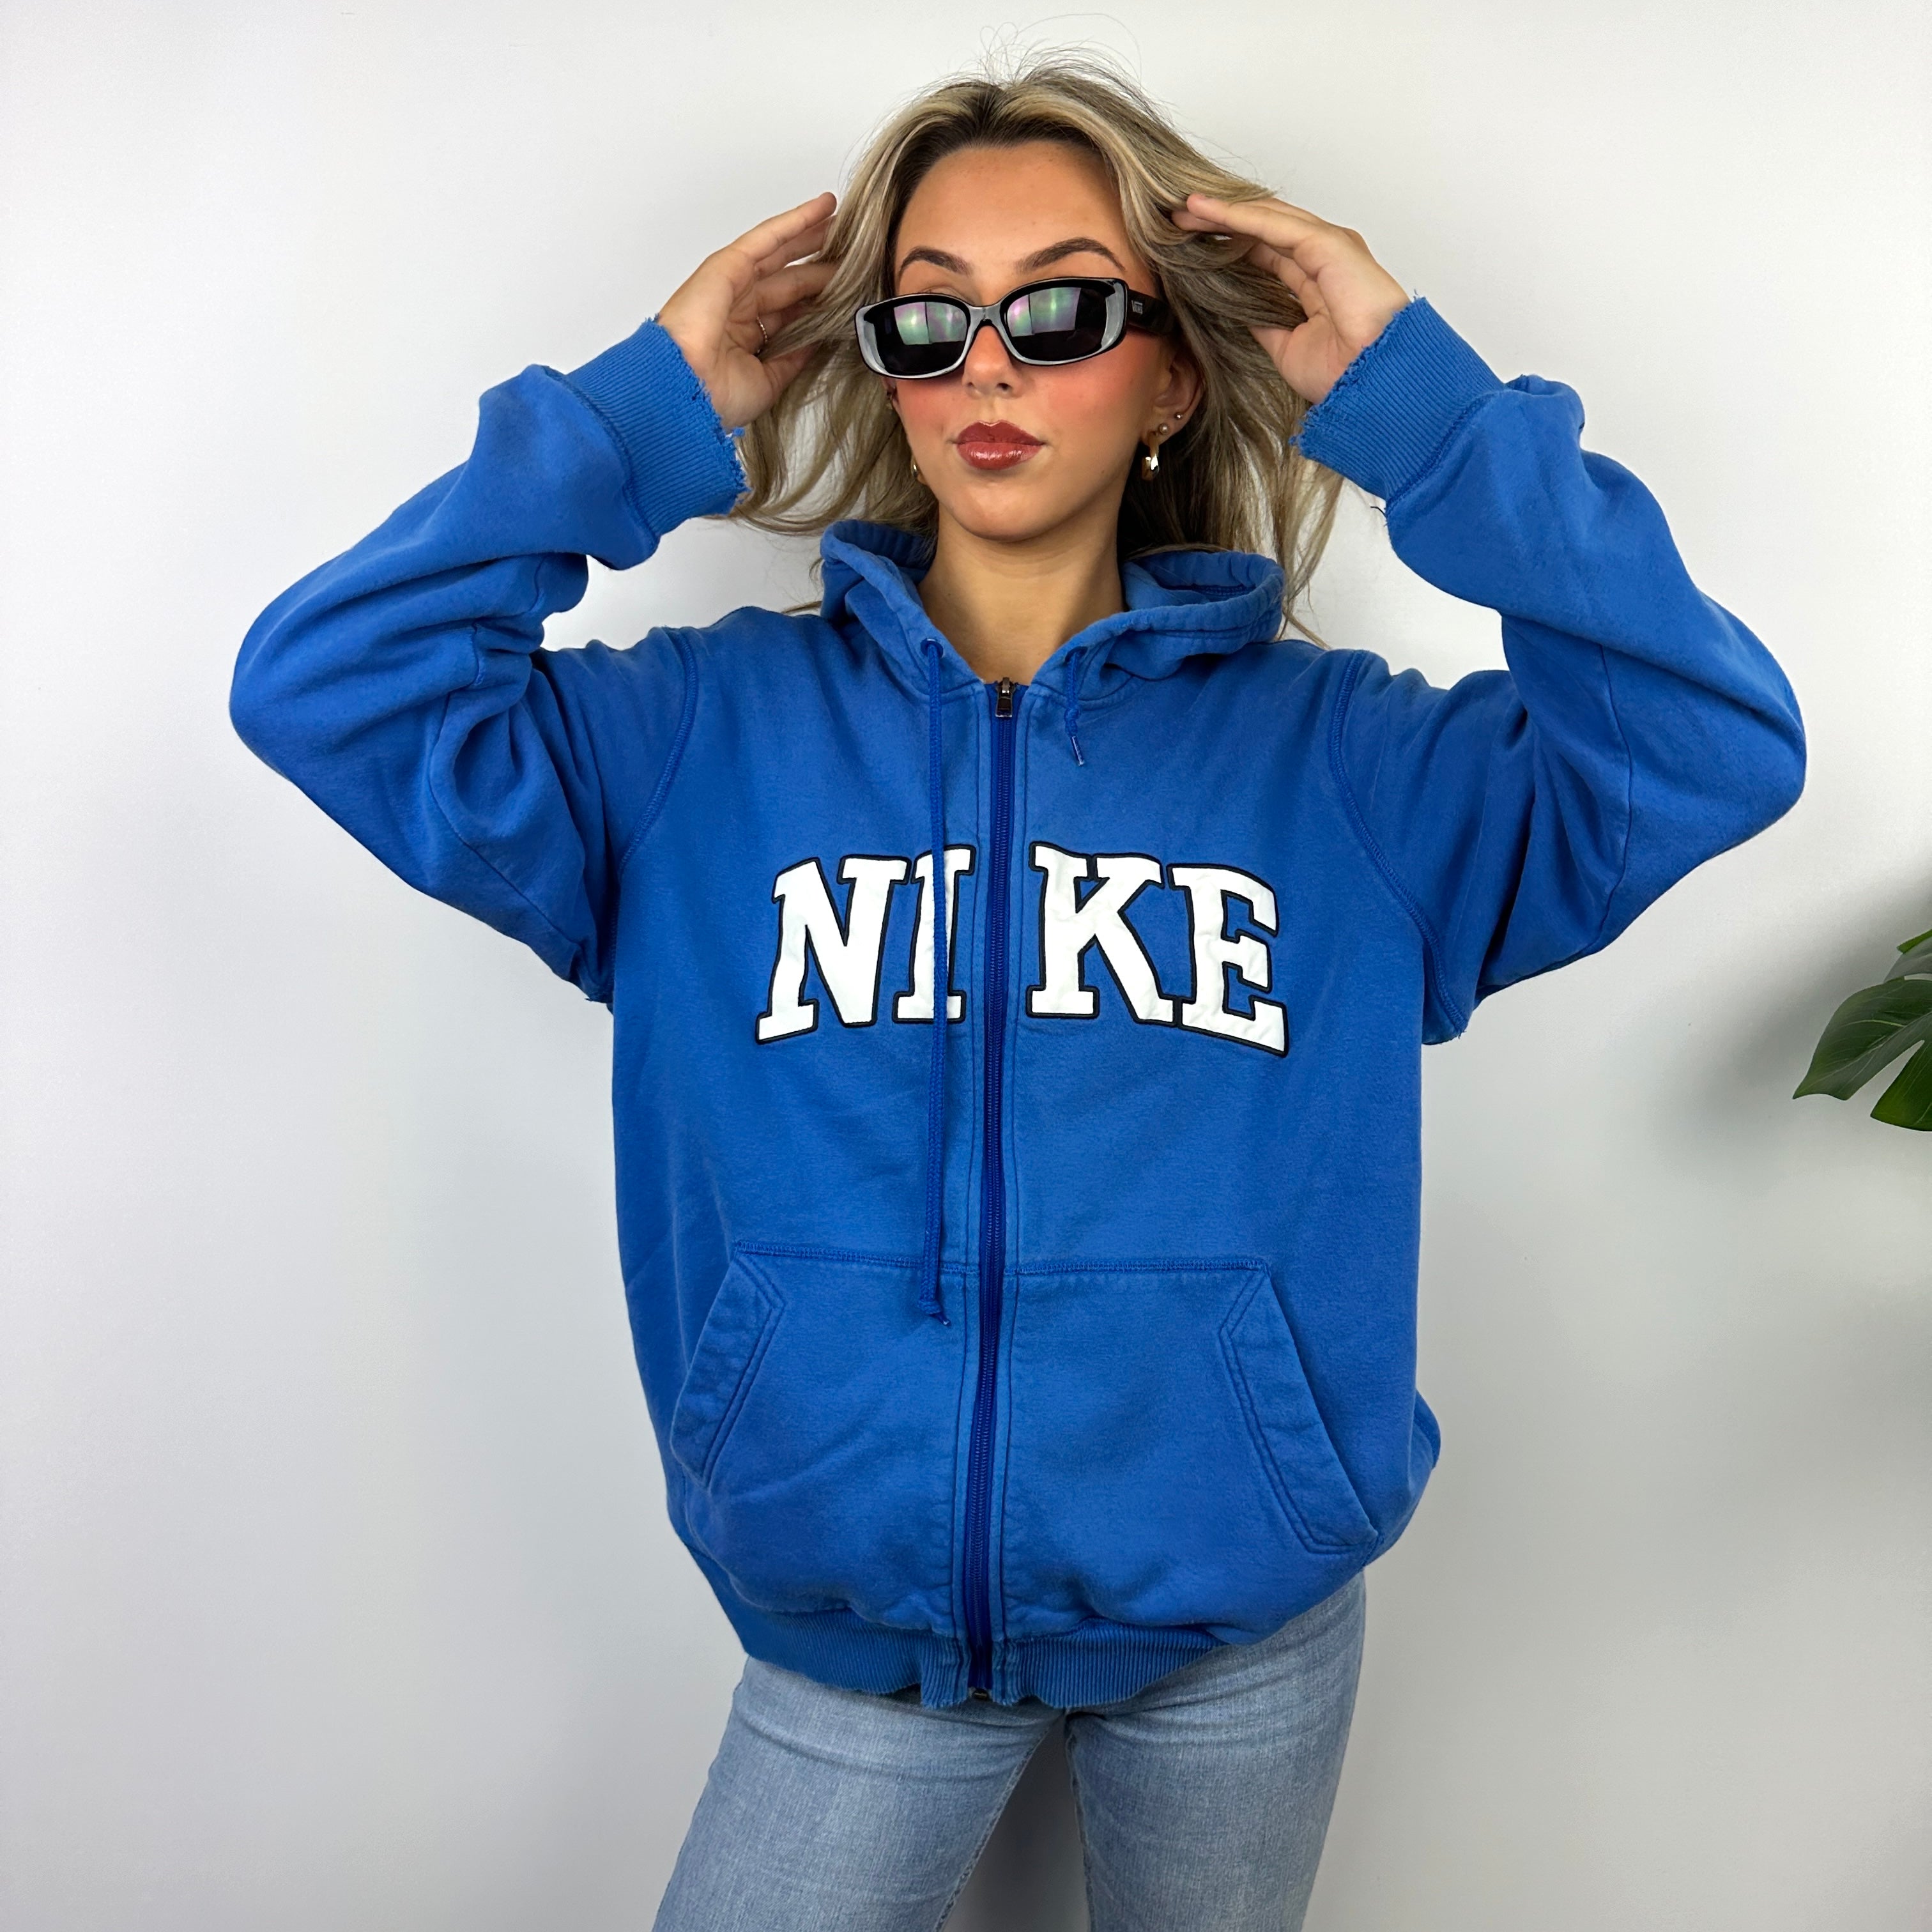 Nike Blue Embroidered Spell Out Zip Up Hoodie Jacket (L)